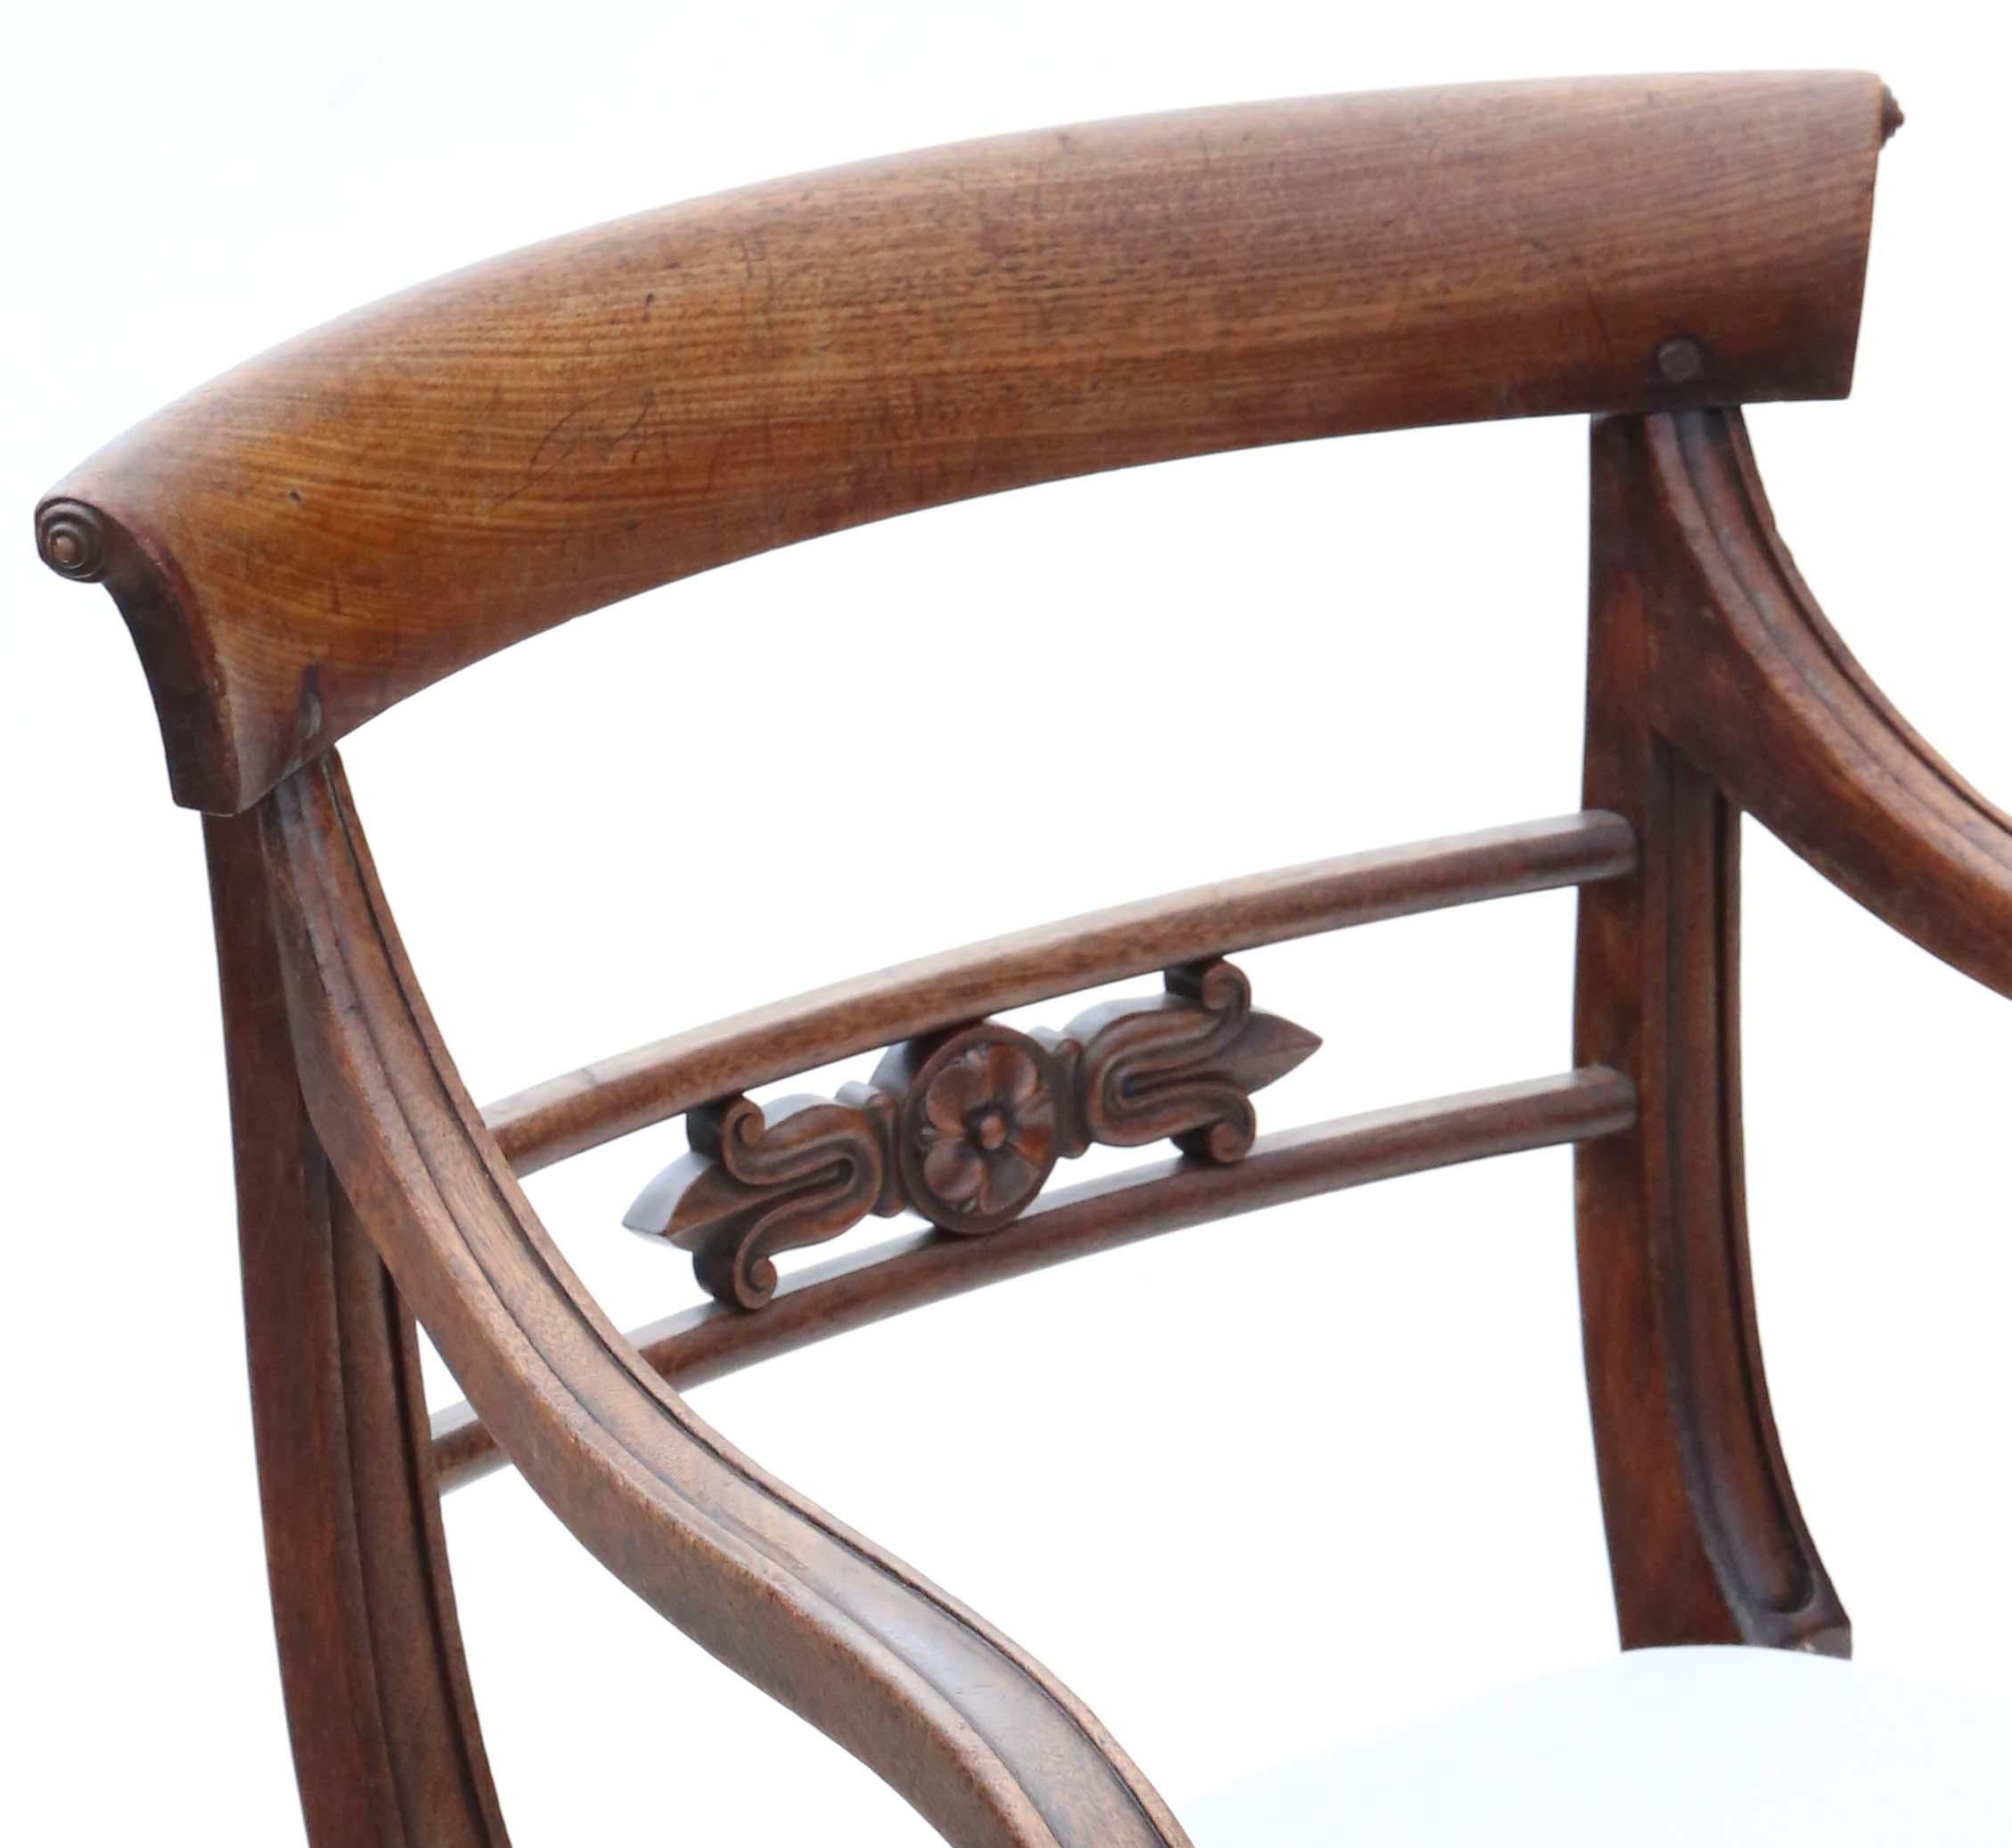 Antique fine quality 19th century mahogany elbow, carver or desk chair. Very rare, with an elegant design.

No loose joints.

Professional new upholstery

Overall maximum dimensions: 61cmW x 58cmD x 85cmH (48cm high seat when sat on, 68cm high